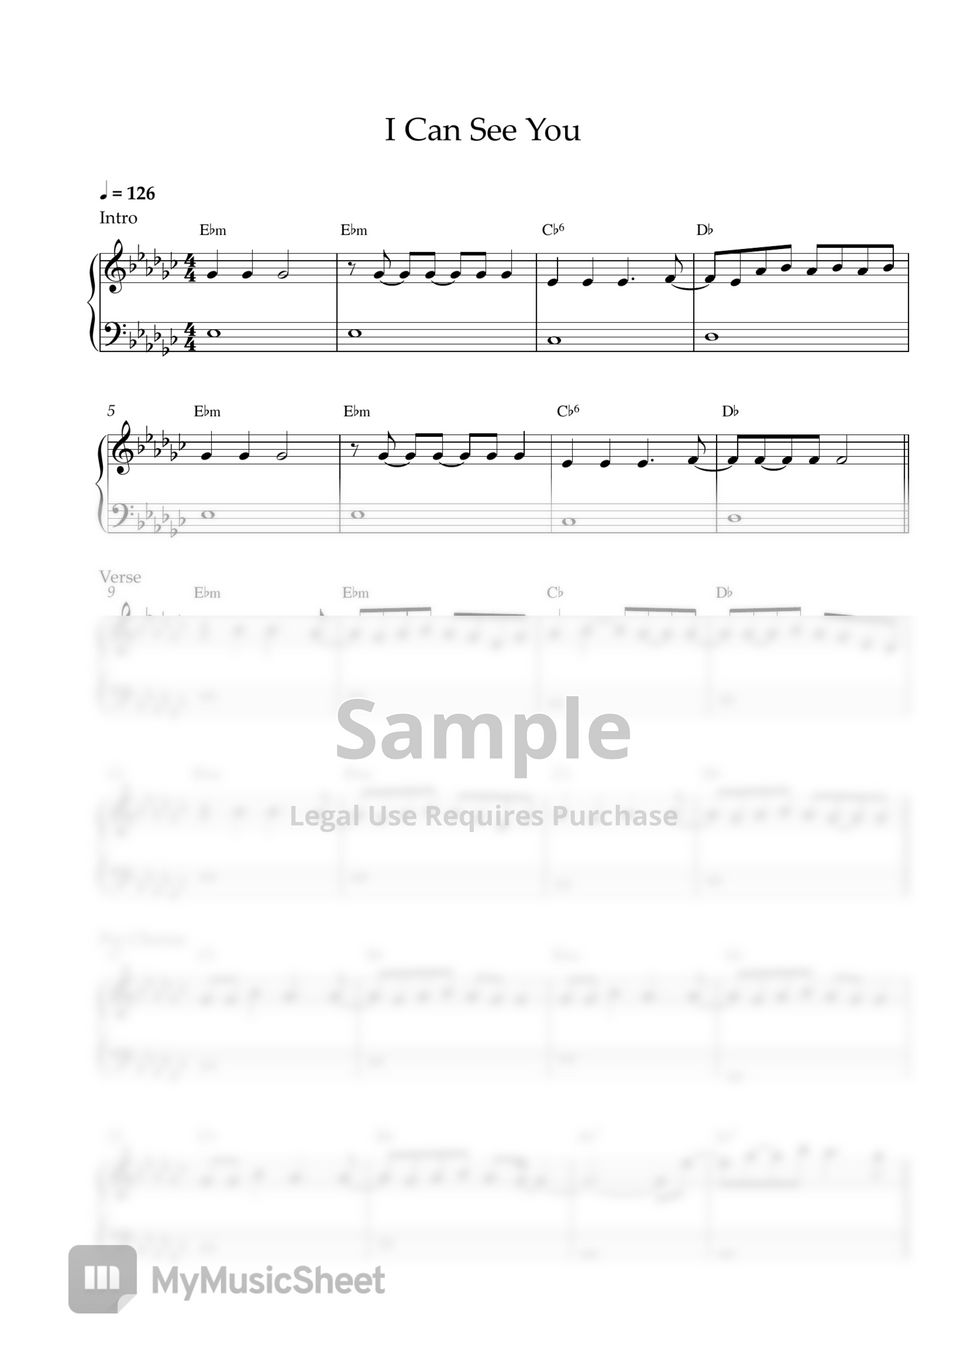 Taylor Swift - I Can See You (Piano Sheet) by Pianella Piano